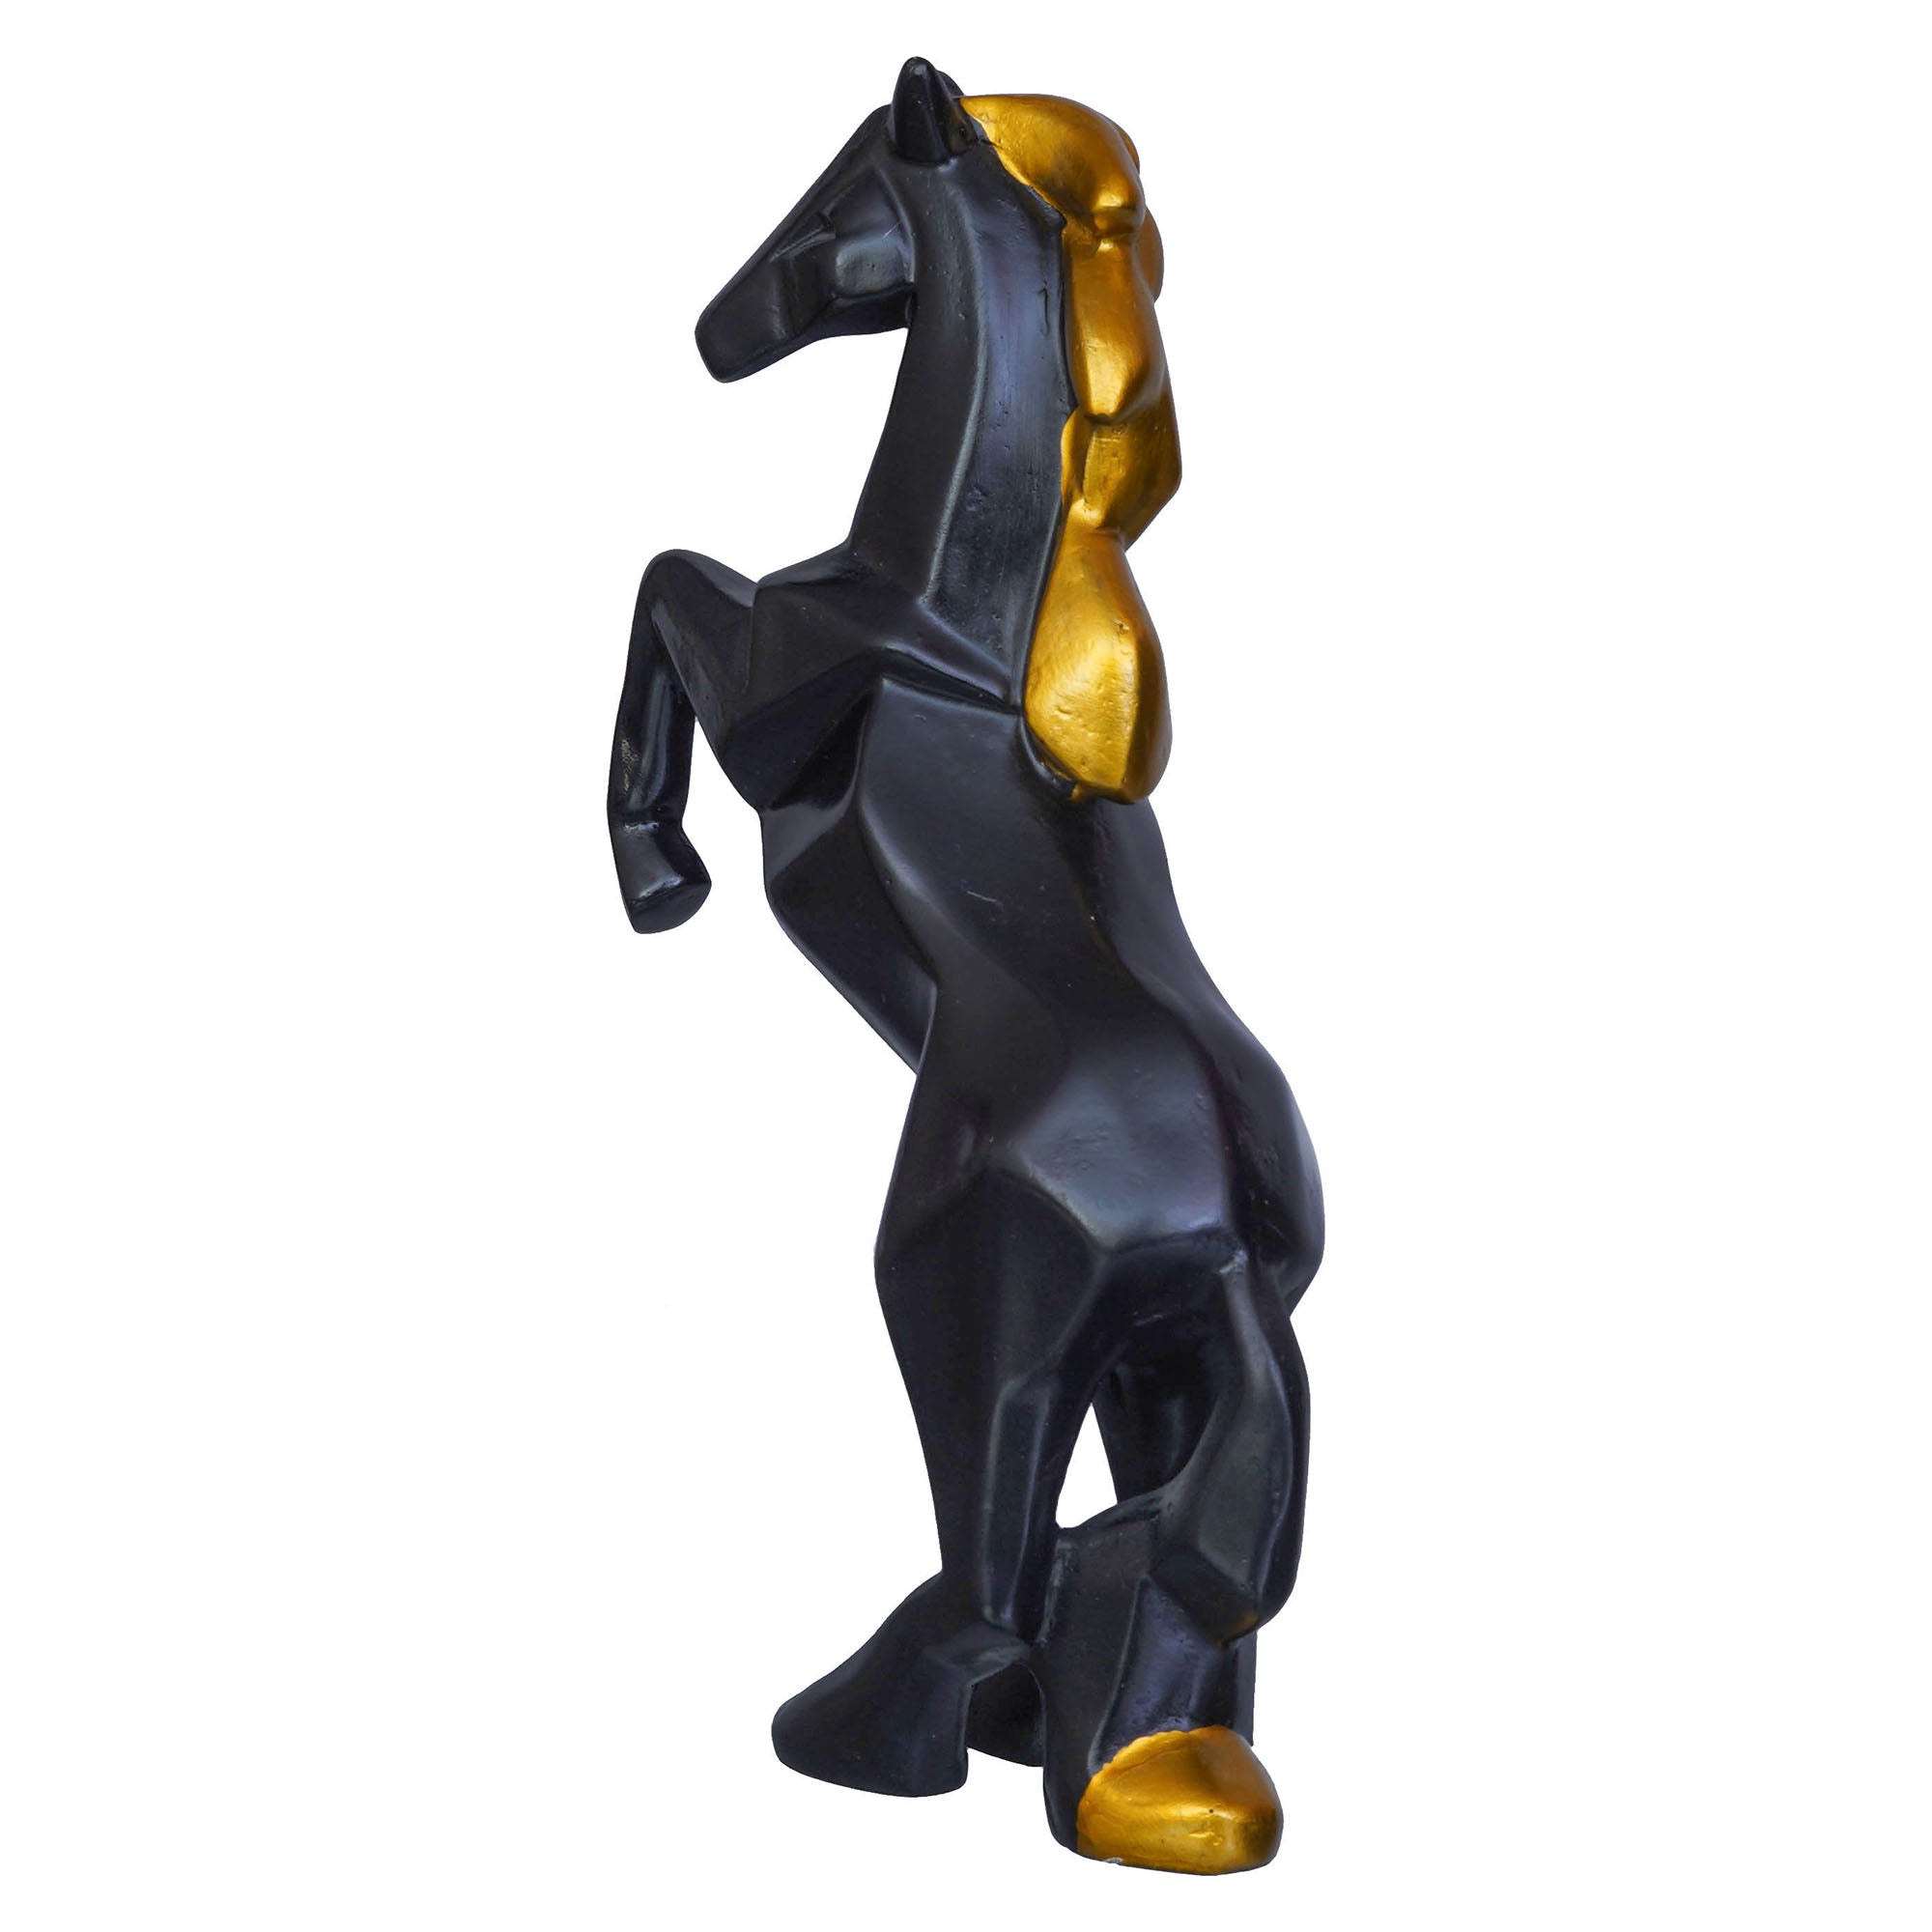 Black Polyresin Jumping Horse Statue with Golden Hair Animal Figurine 8